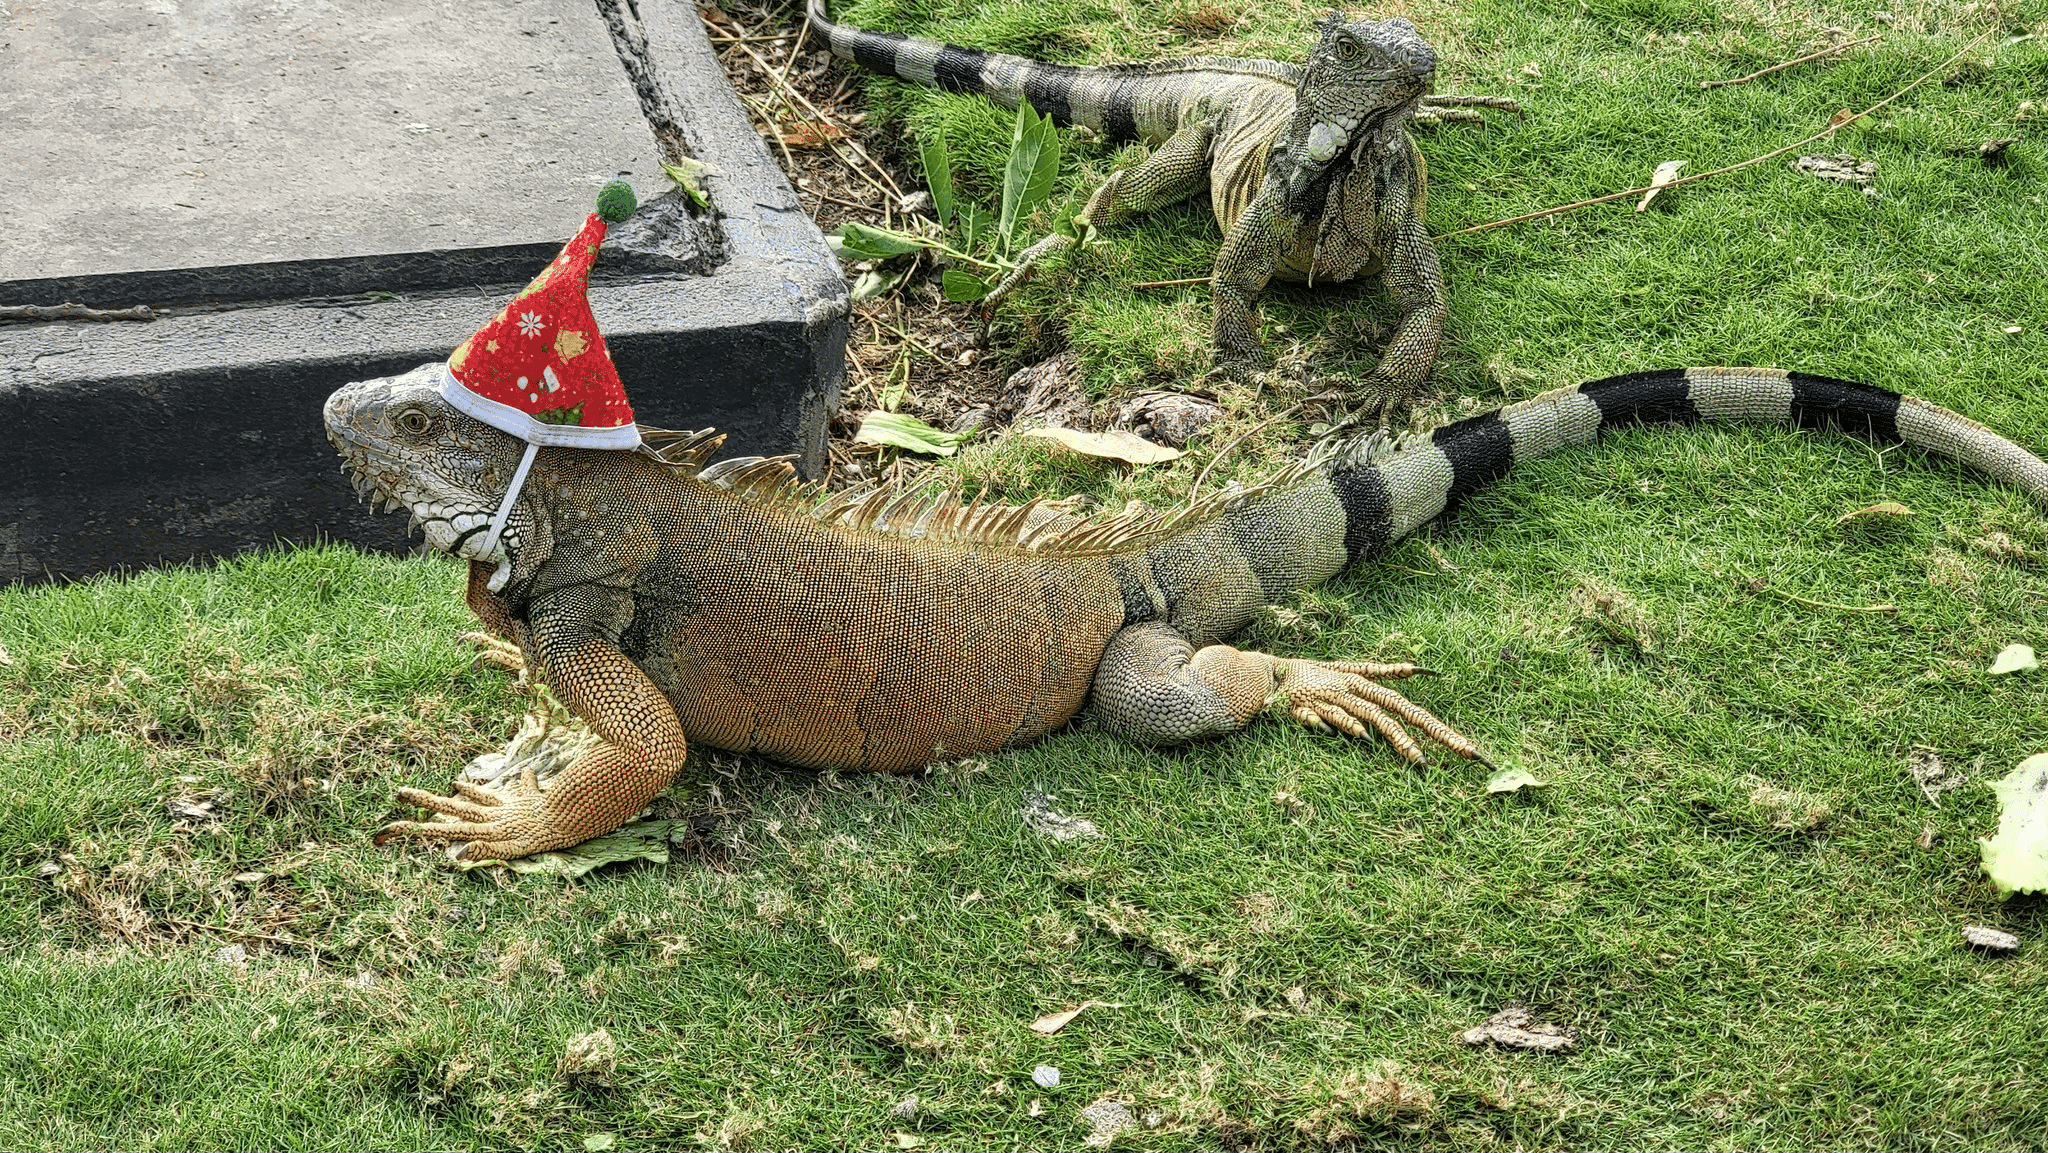 Lots of wildlife spotted during an Eco-Jungle Cruise — a blue heron, an iguana sporting his Christmas hat and a handsome sloth perched high in the treetops.